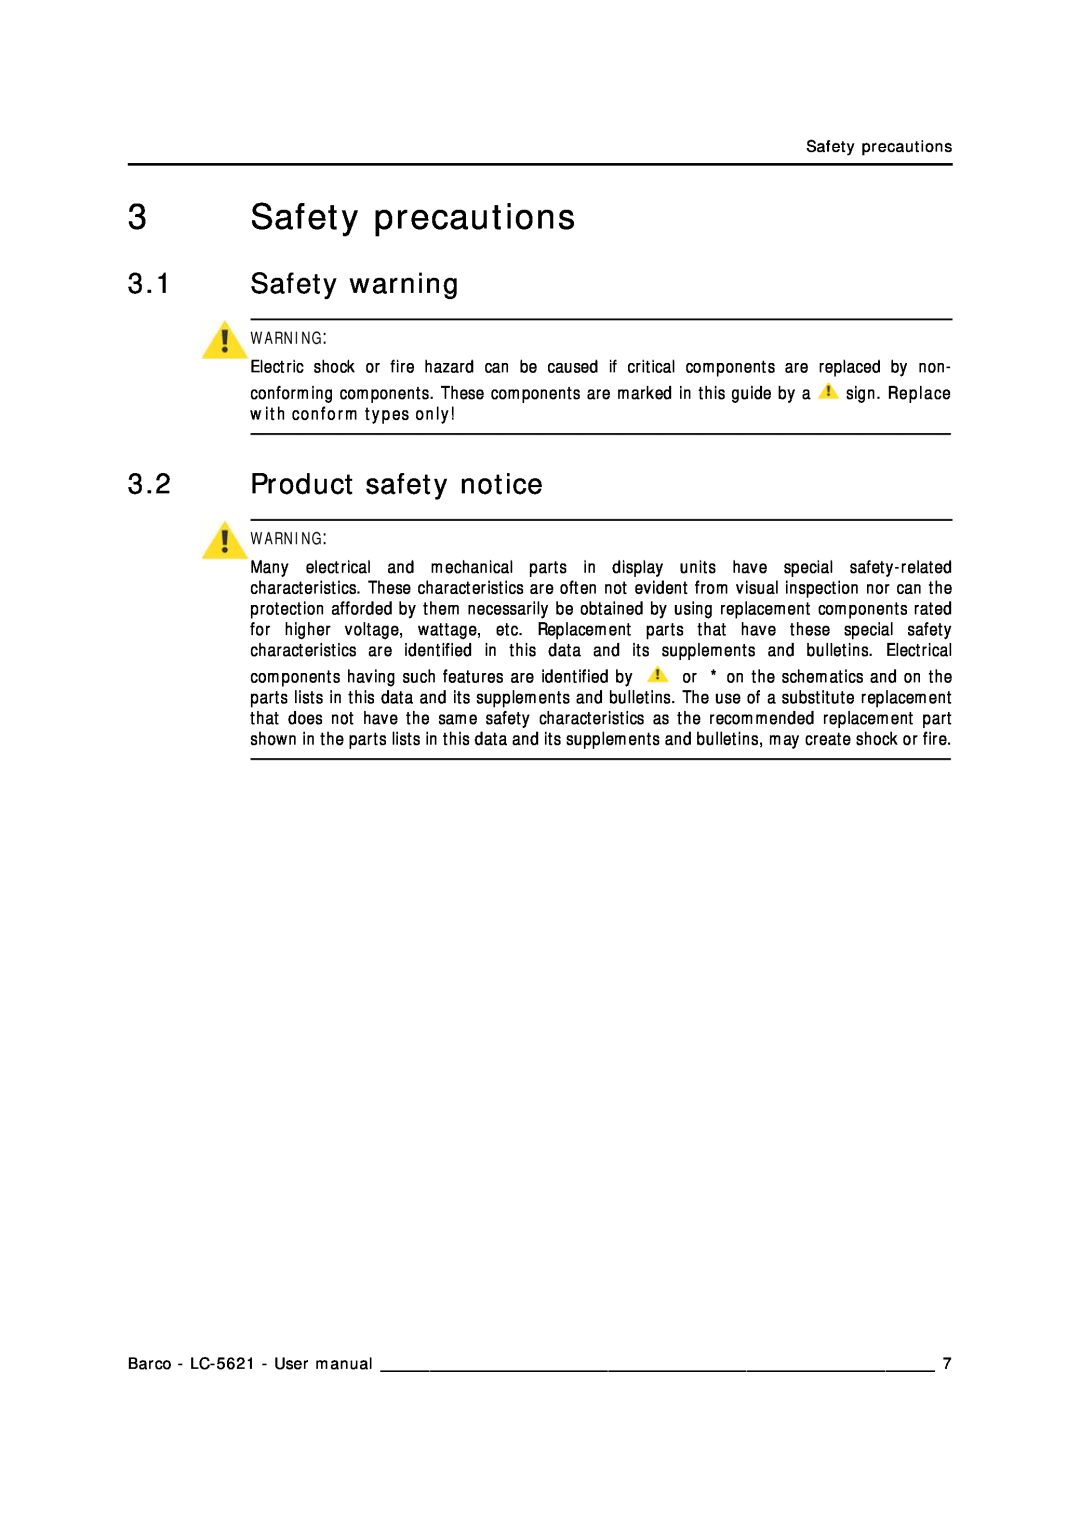 Barco LC-5621 user manual Safety precautions, Safety warning, Product safety notice, with conform types only 